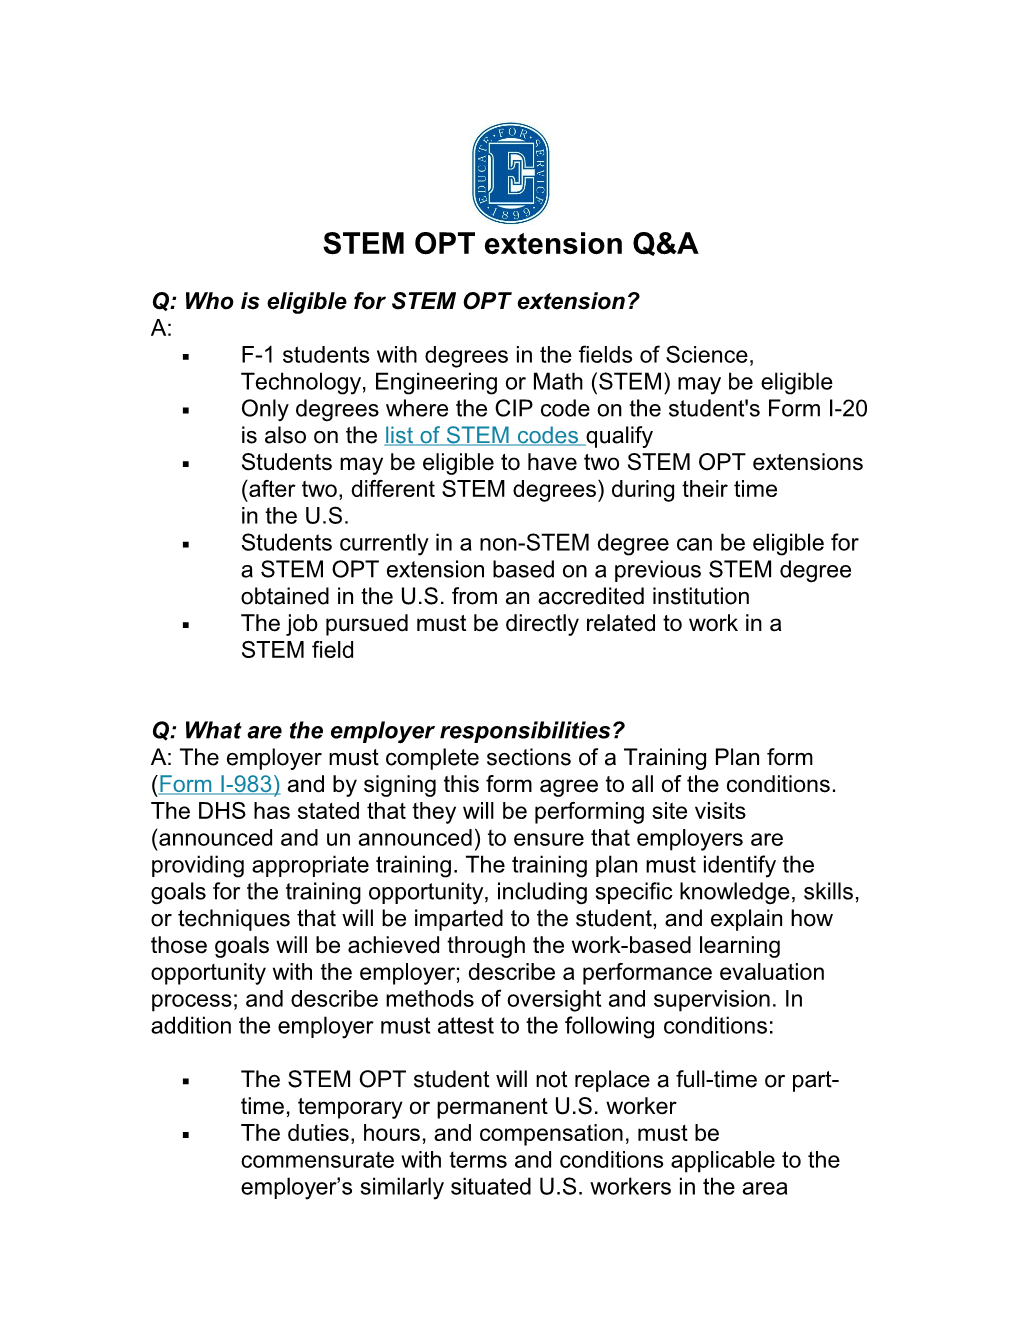 Q: Who Iseligible for STEM Optextension?